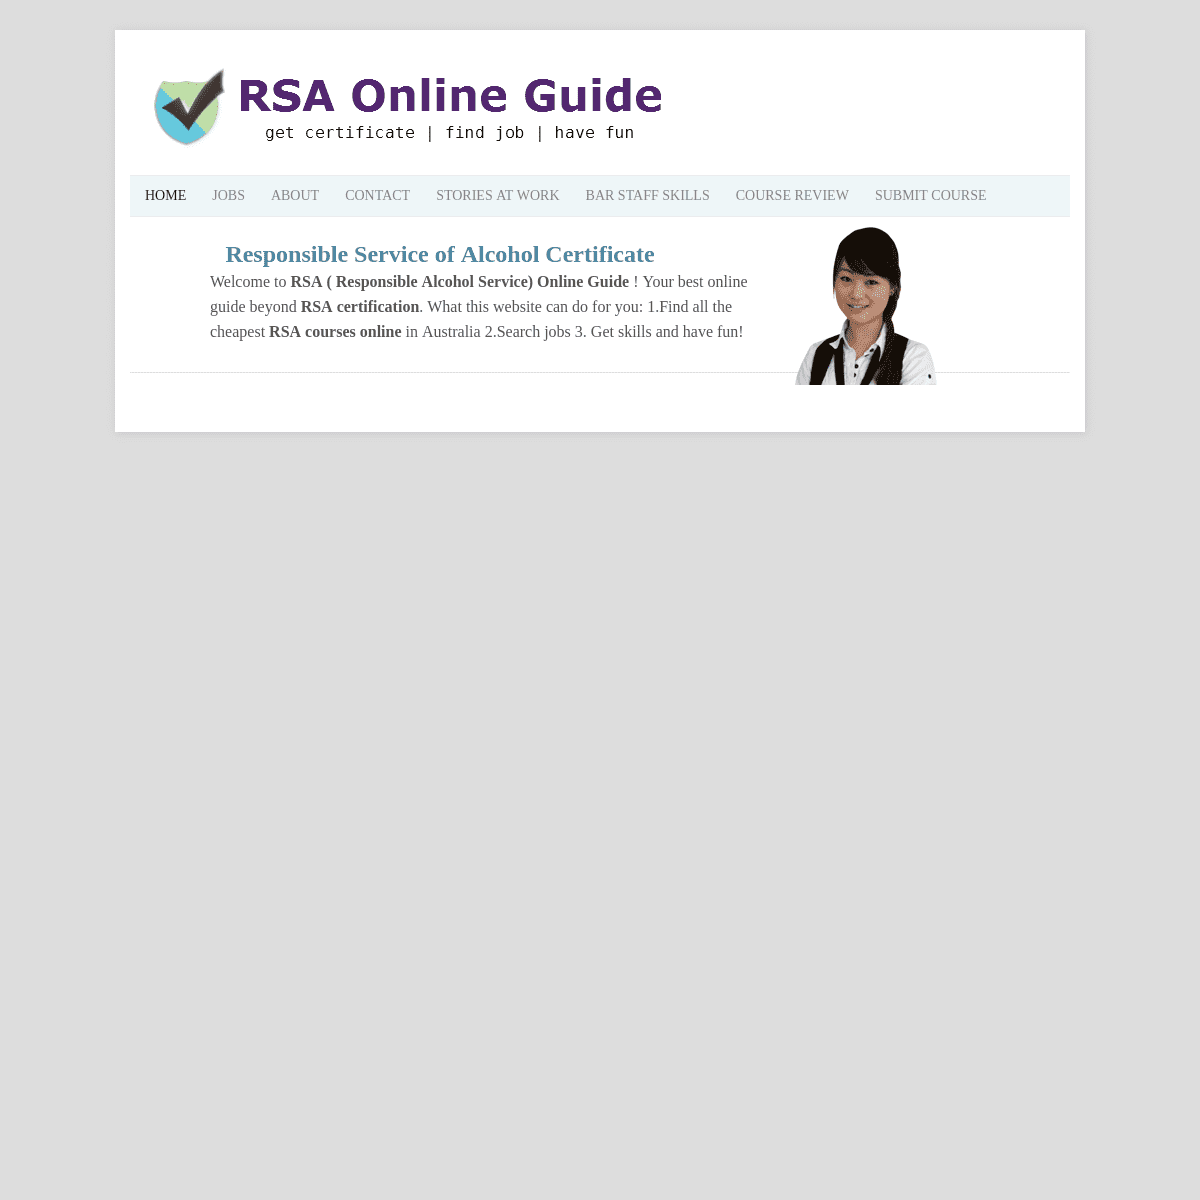 RSA Online Guide - best guide to find cheapest RSA course and jobs